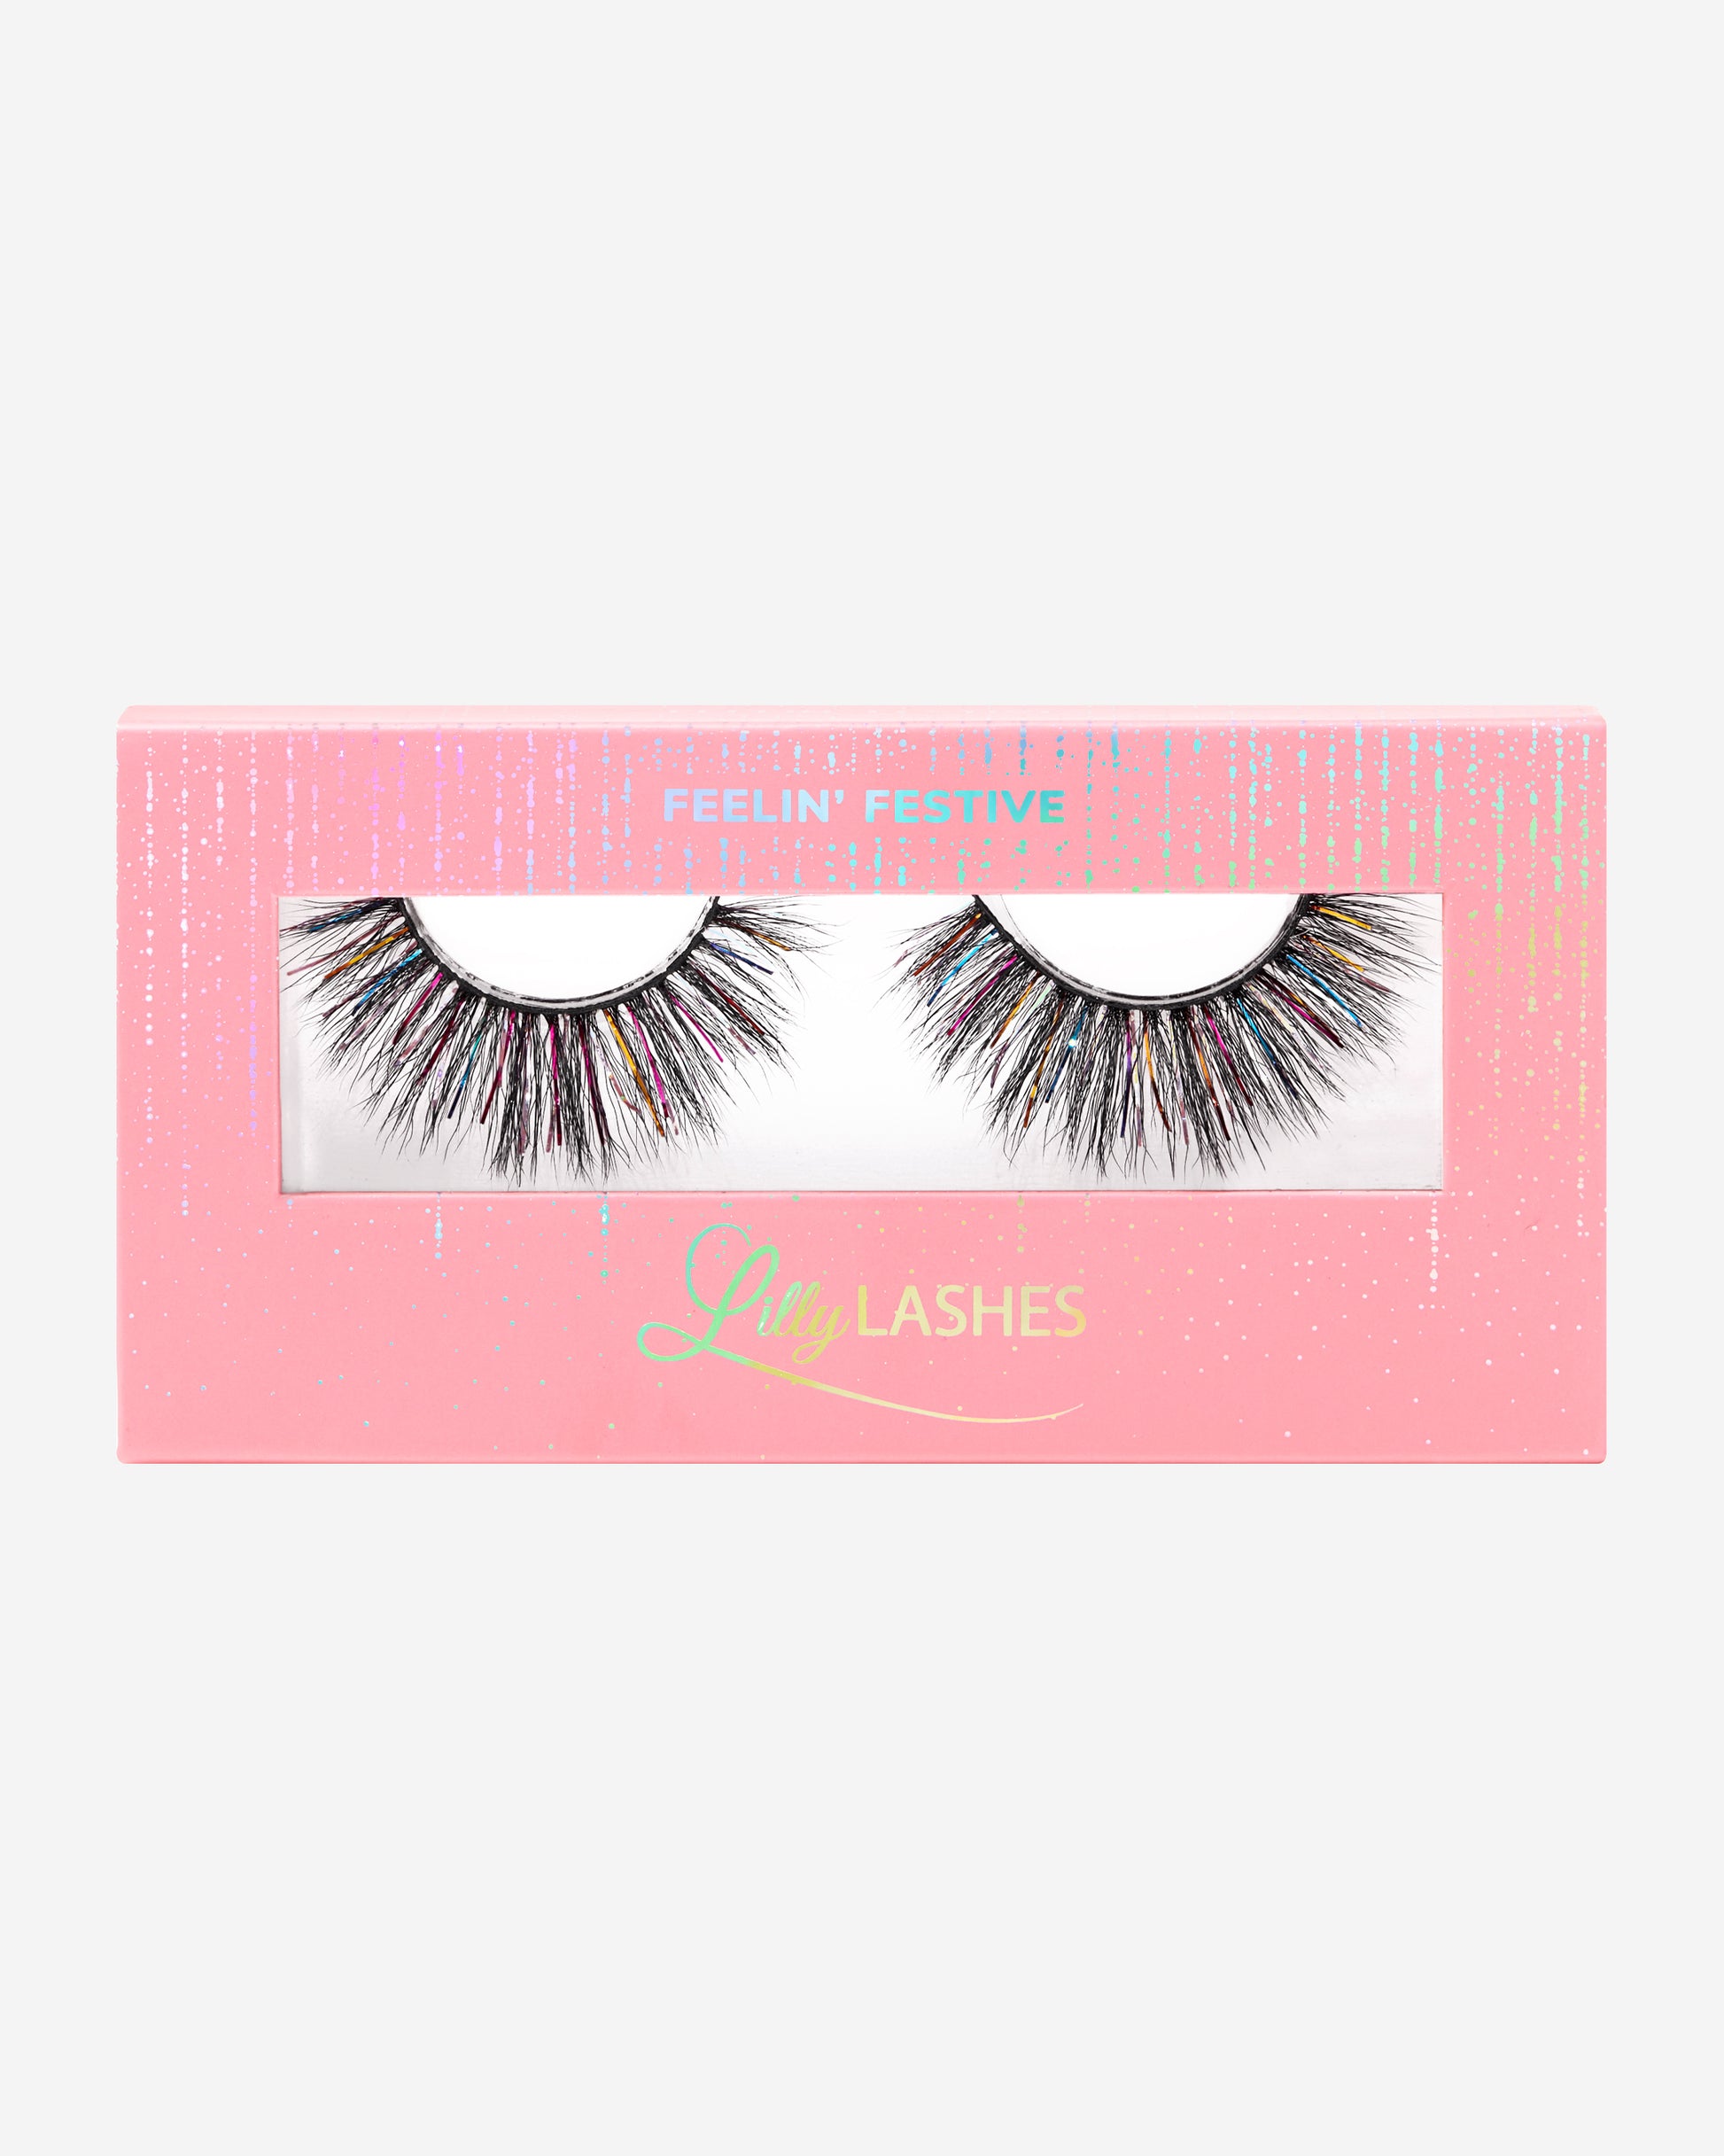 Lilly Lashes | Faux Mink Tinsel Lashes | Feelin' Festive | Front of Box